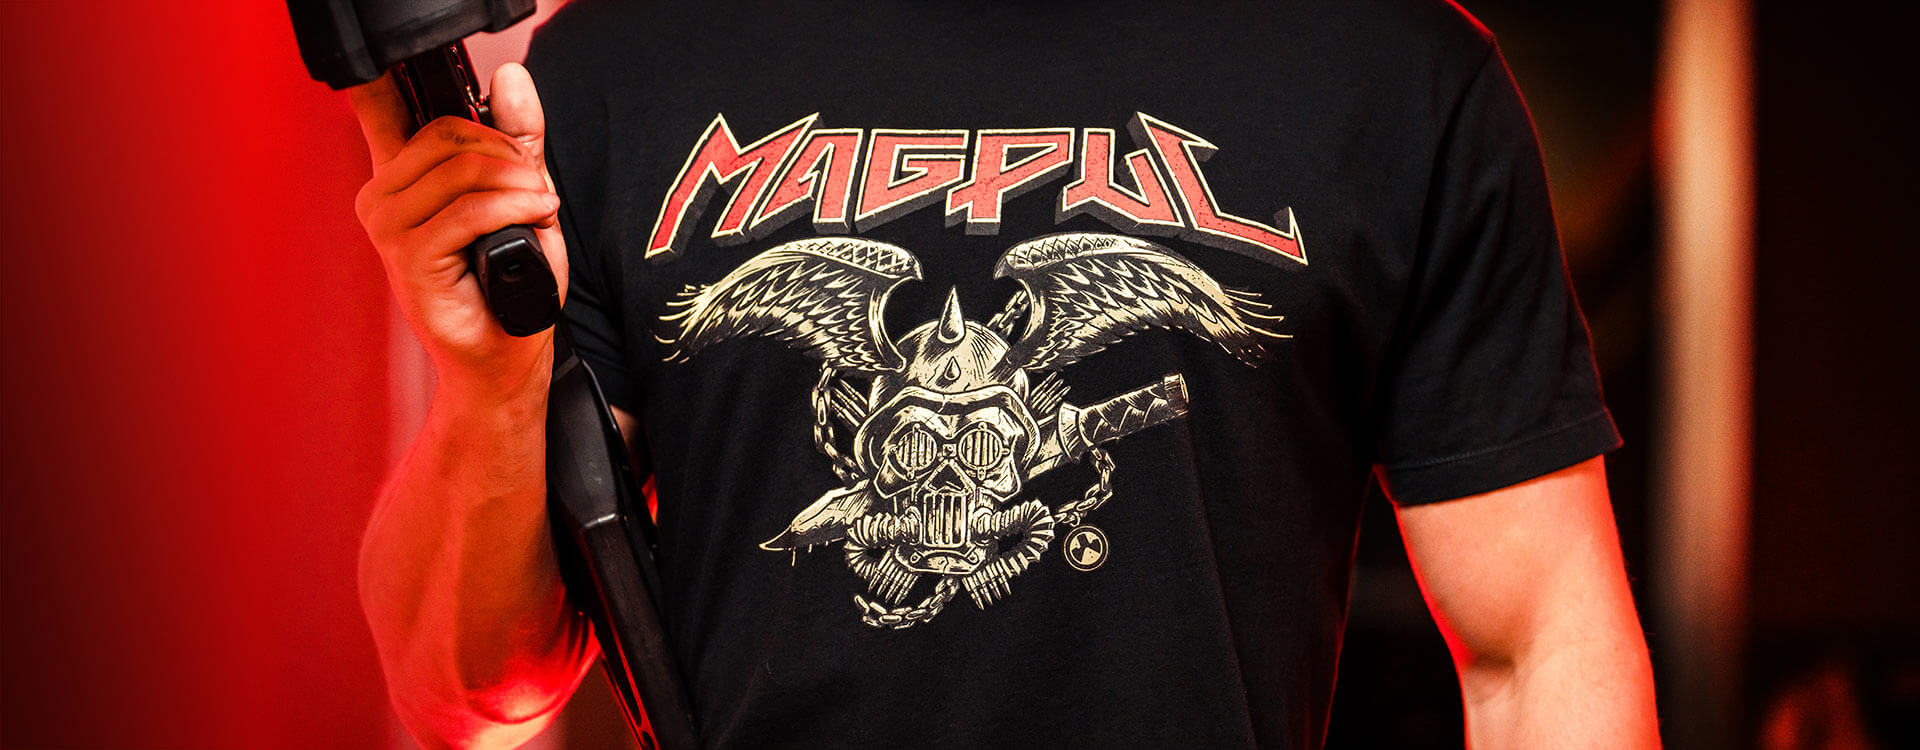 Magpul Heavy Metal Cotton T-Shirt with wicked graphic on man holding AR15 with D-60 Drum PMAG